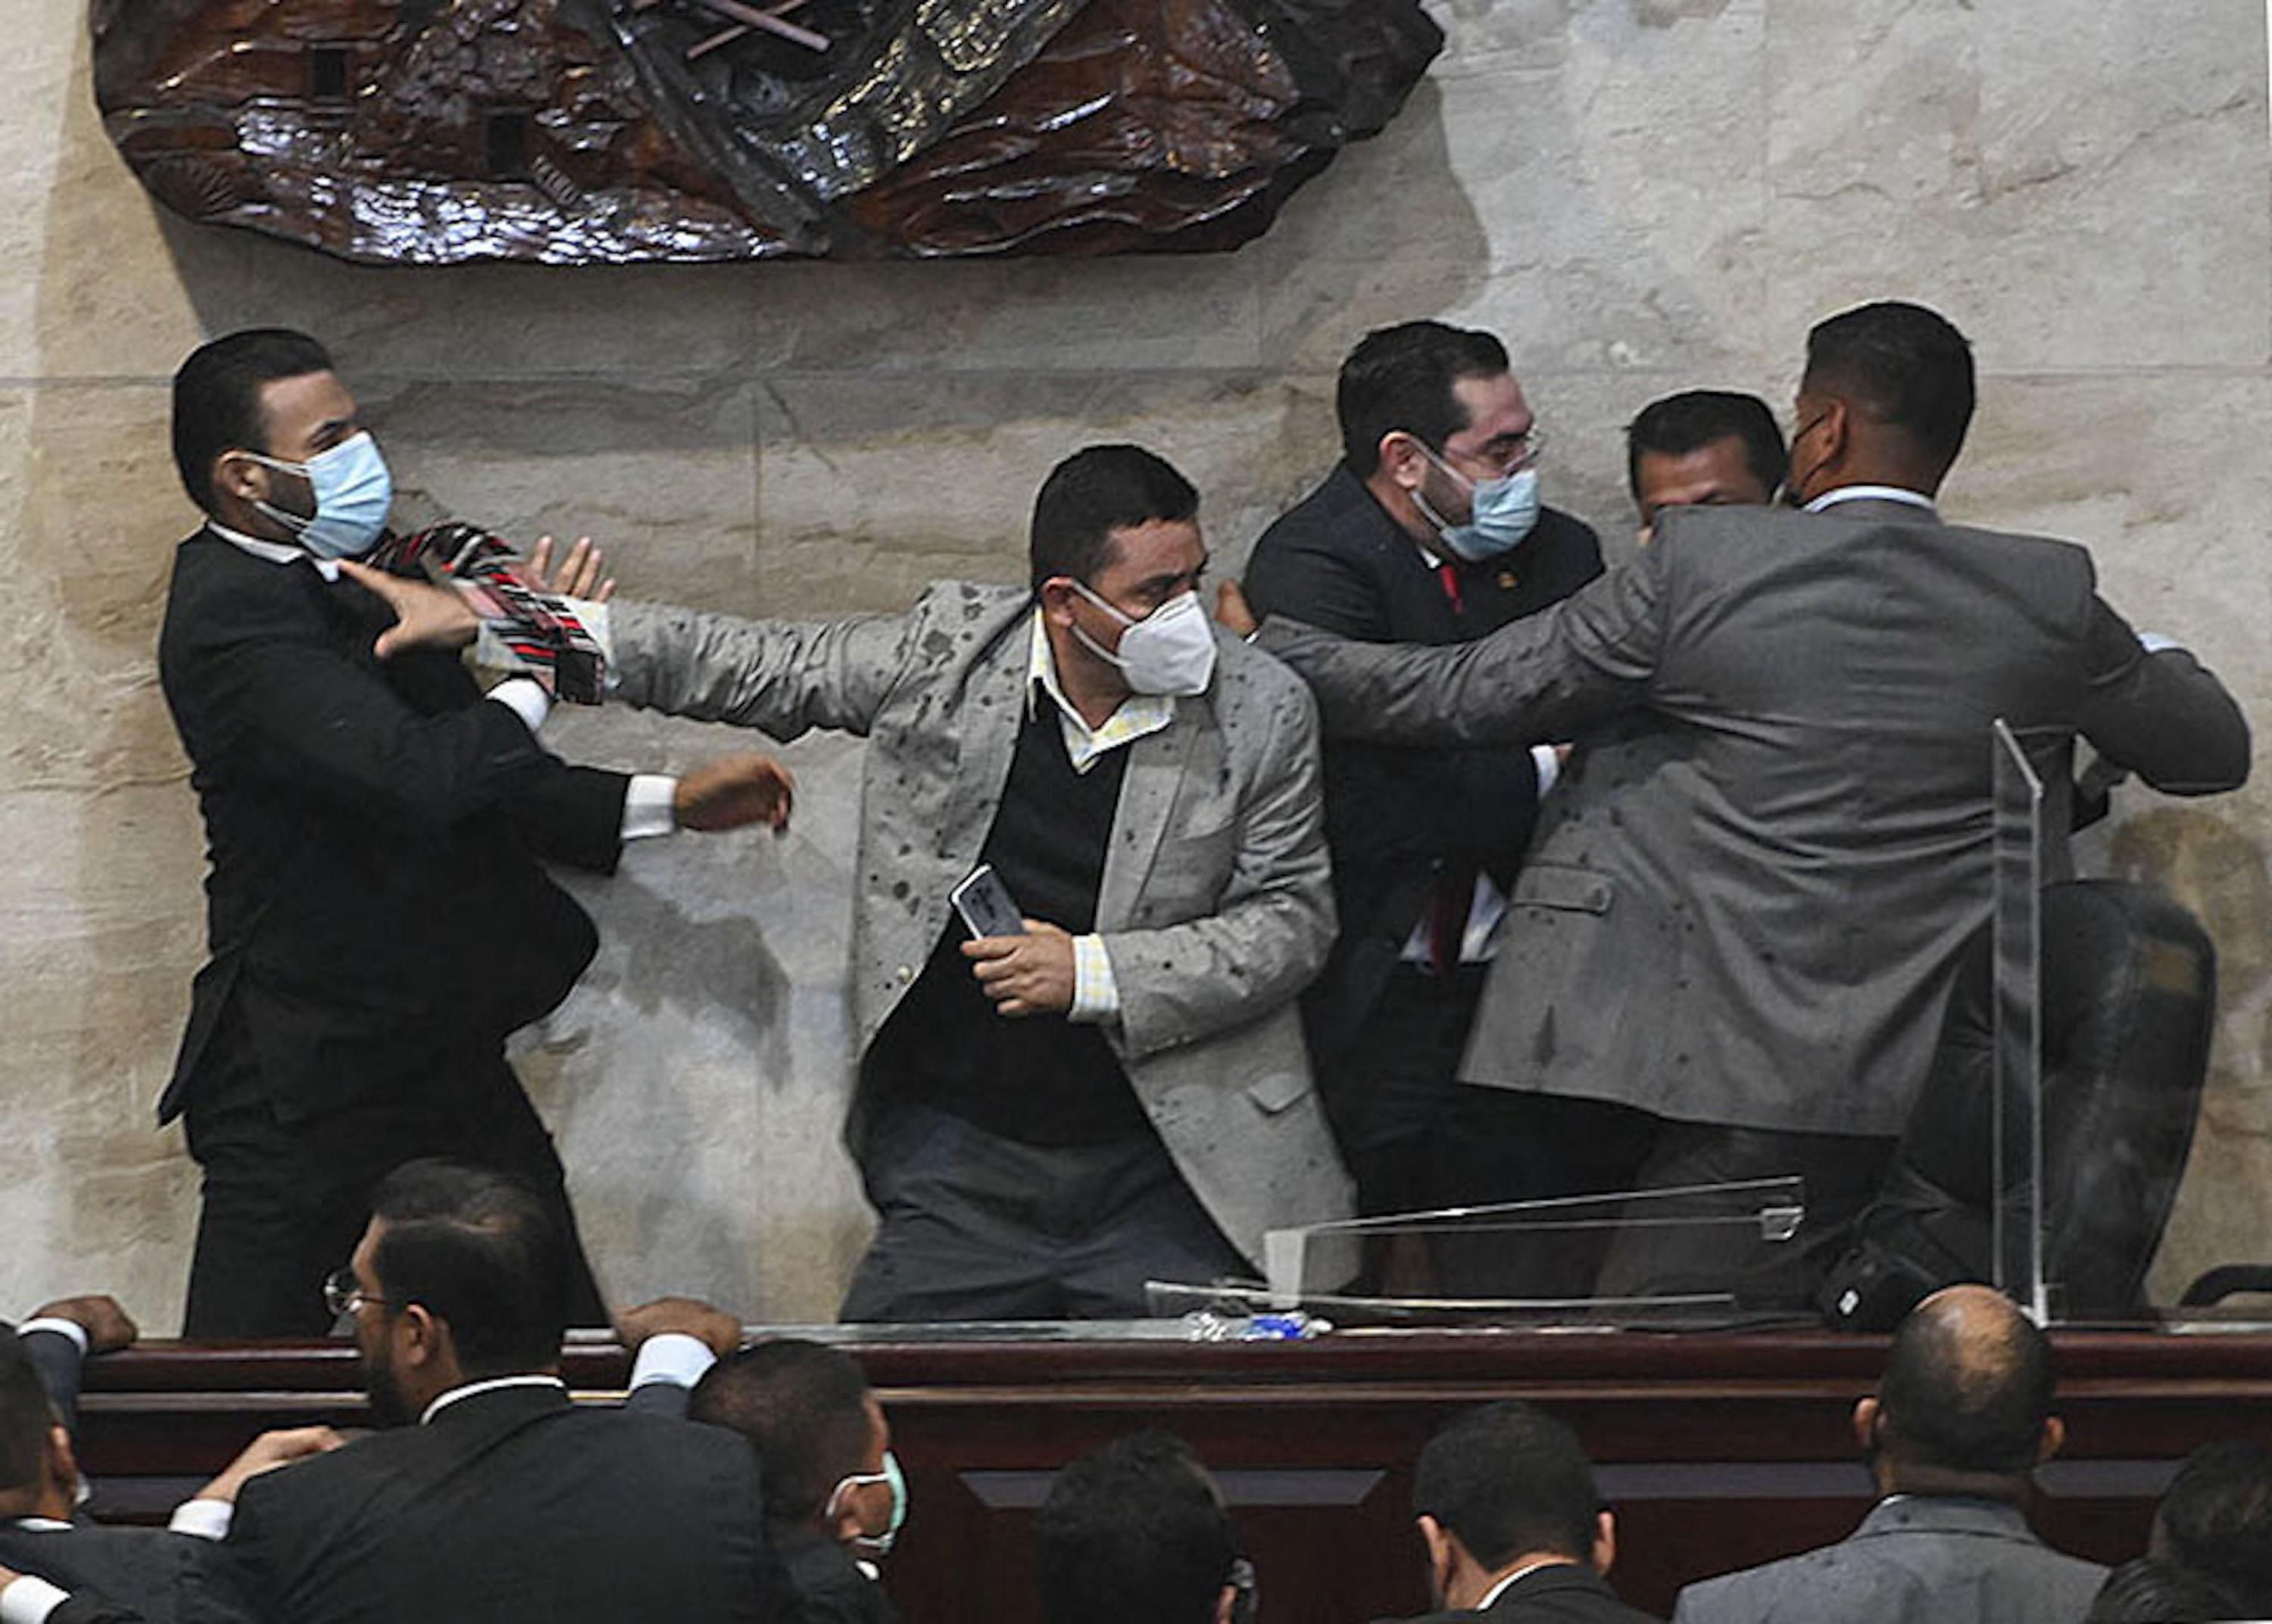 Deputy for the Libertad y Refundacion (LIBRE) party Rassel Tome (L) tries to assault deputy Jorge Calix (2-R) after his election as President of the Provisional Board of Directors of the National Congress, at the Legislative headquarters in Tegucigalpa, on January 21, 2022. - The Honduran Congress elected its provisional board of directors this Friday in the midst of a brawl, with blows and shoves, because 20 members of the party that won the November presidential elections rebelled against the elected president Xiomara Castro. Photo Orlando SIERRA/AFP